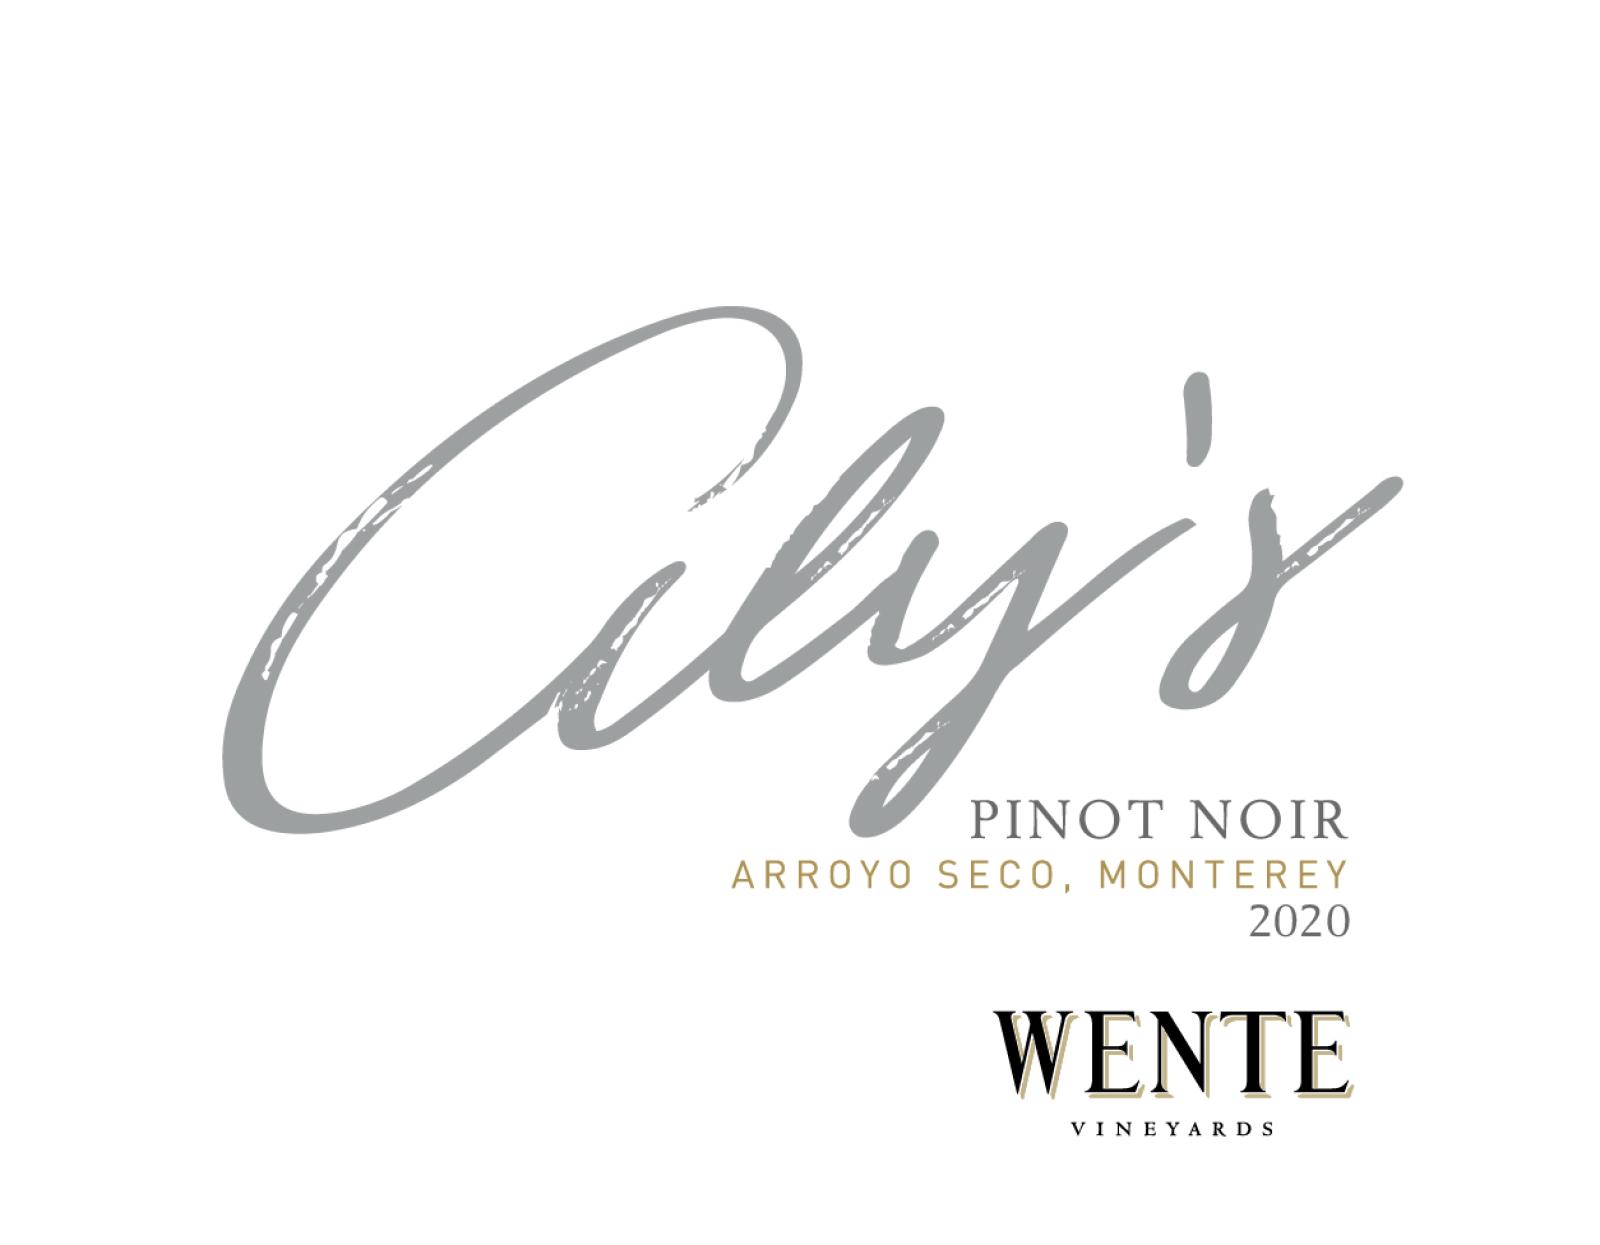 Wente Aly's Pinot Noir 2020